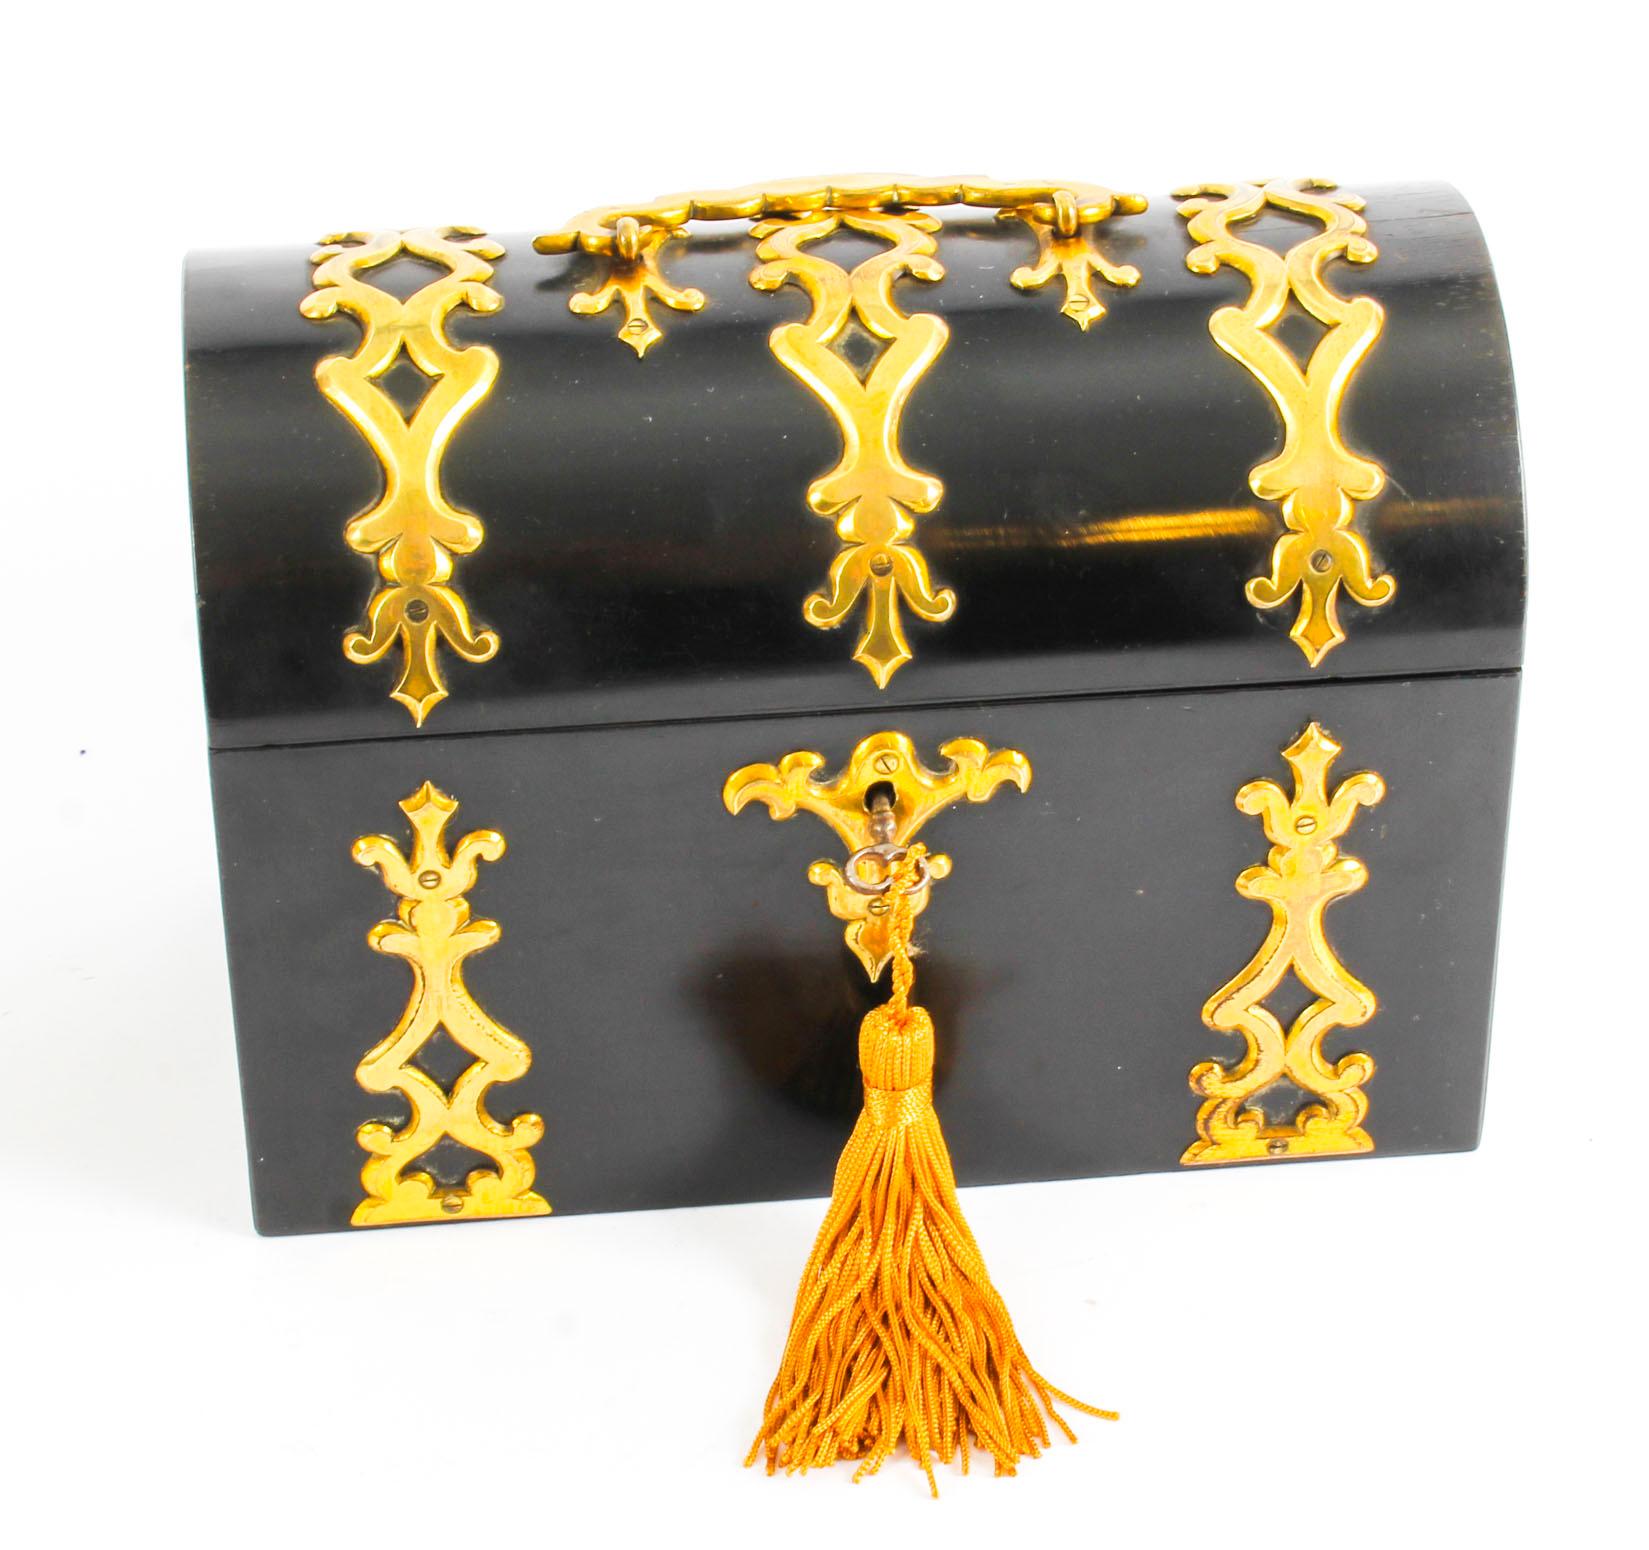 This is a wonderful antique ebonised and cut card brass casket shaped stationary box, circa 1860 in date.

It bears the brass label of the highly sought after jewellers and silversmiths Howell James & Co. of Regent Street, London.

This